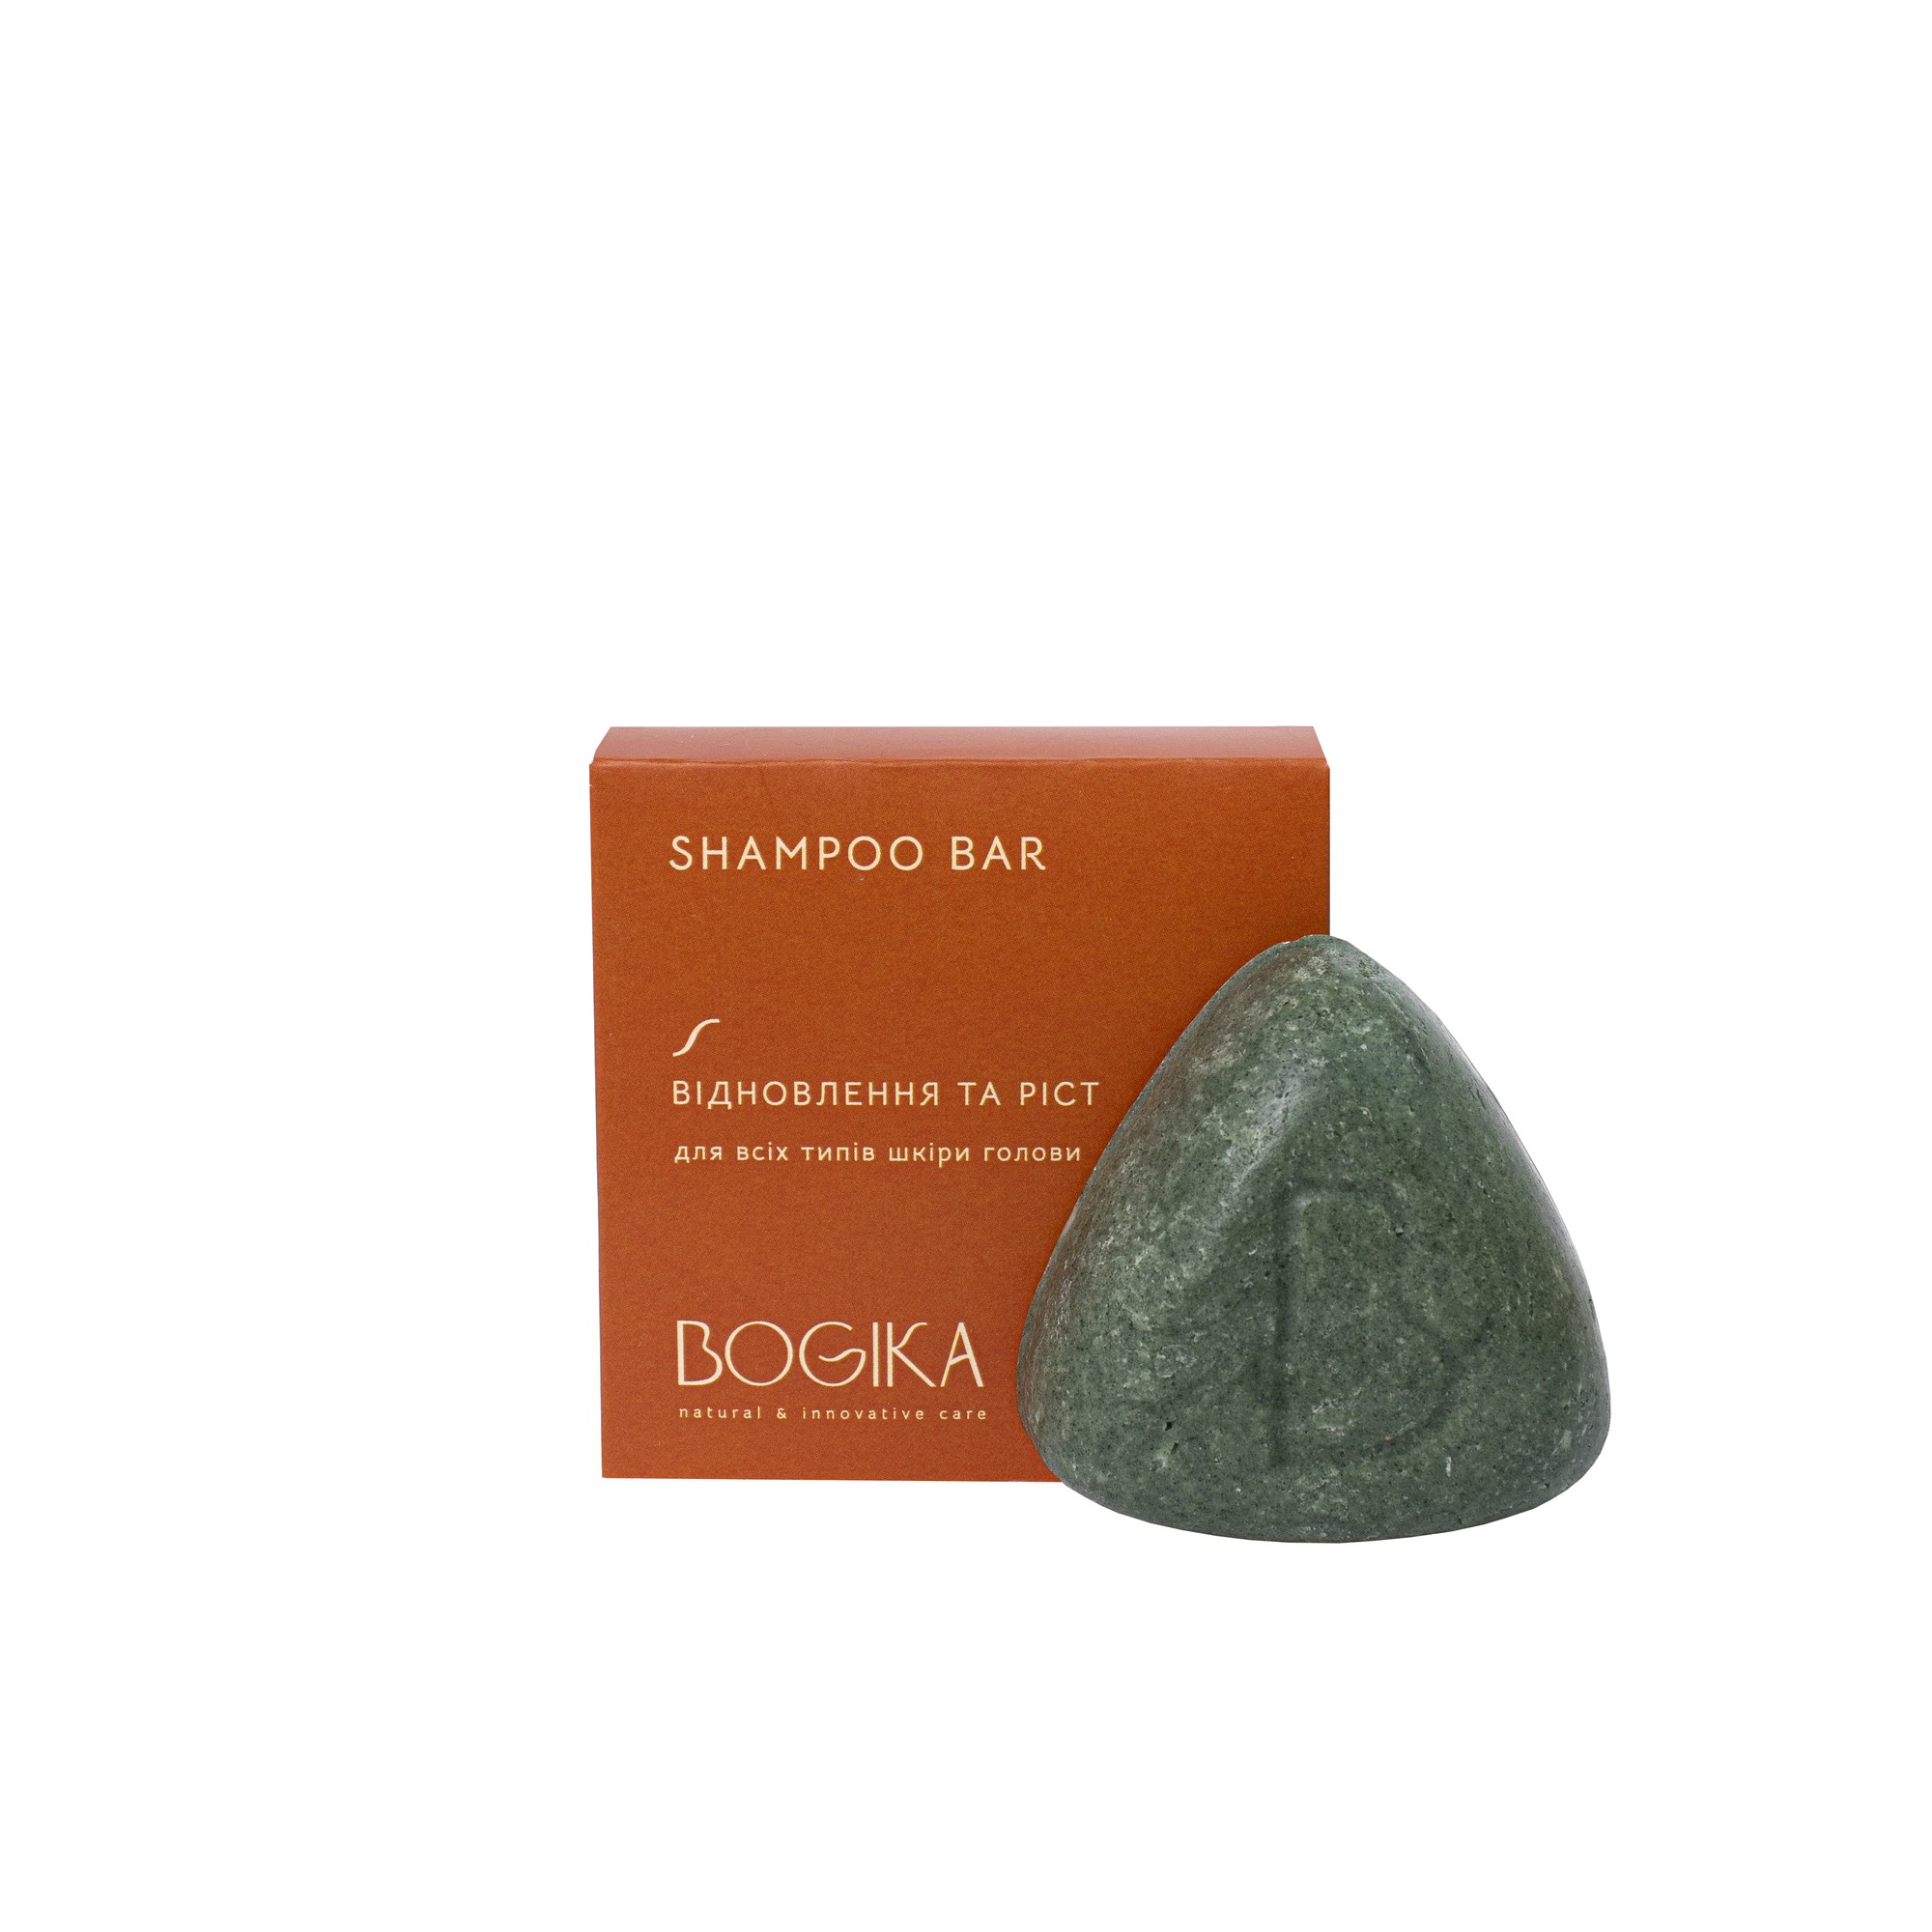 SHAMPOO BAR, 50g,  "recovery and growth" with spirulina